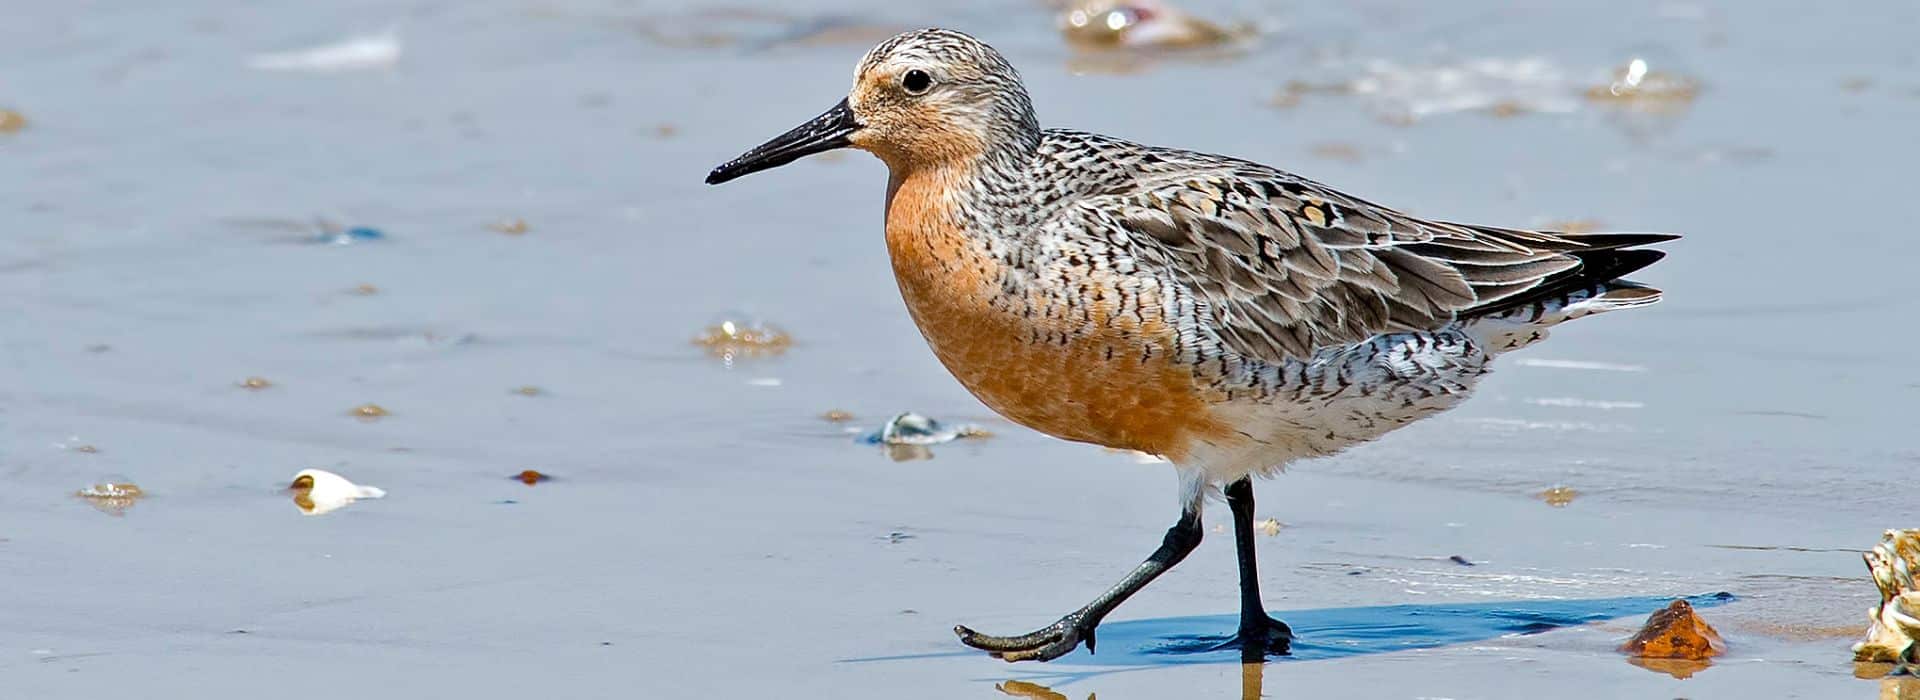 Red Knot bird walking on the wet sand